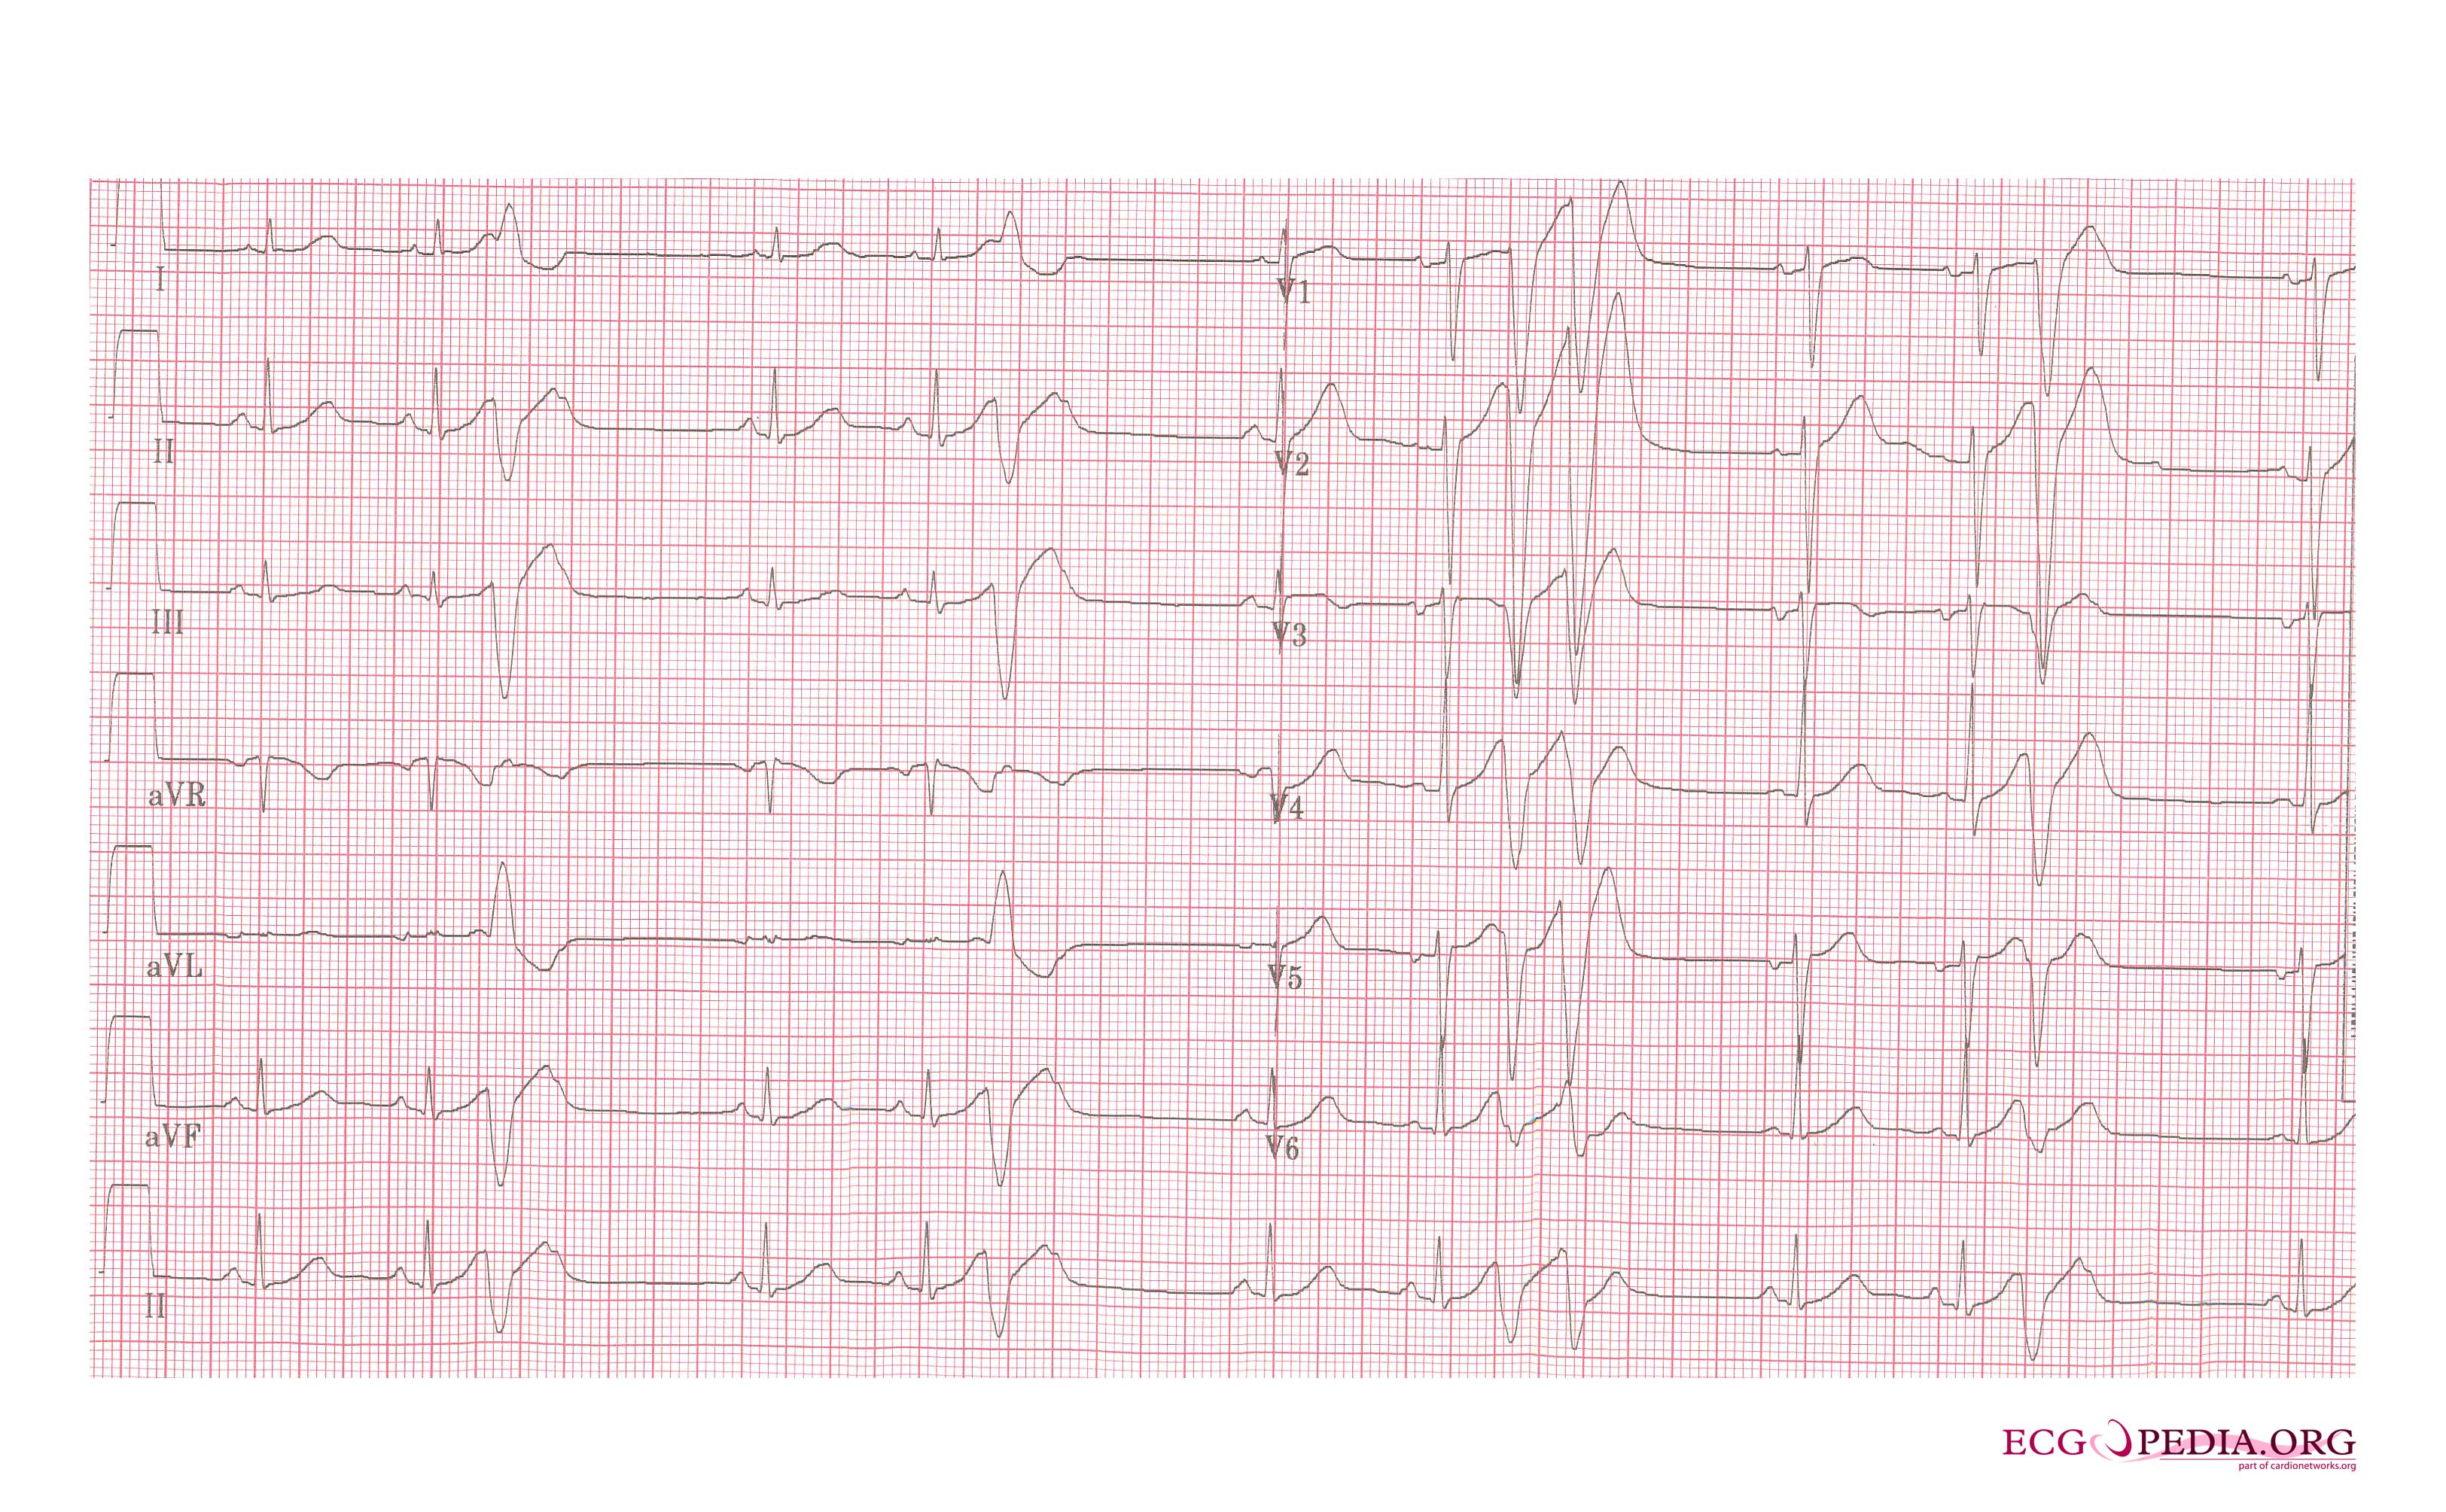 Arrhythmias in a patient with short coupled torsade de pointes: frequent short coupled extrasystoles[1]